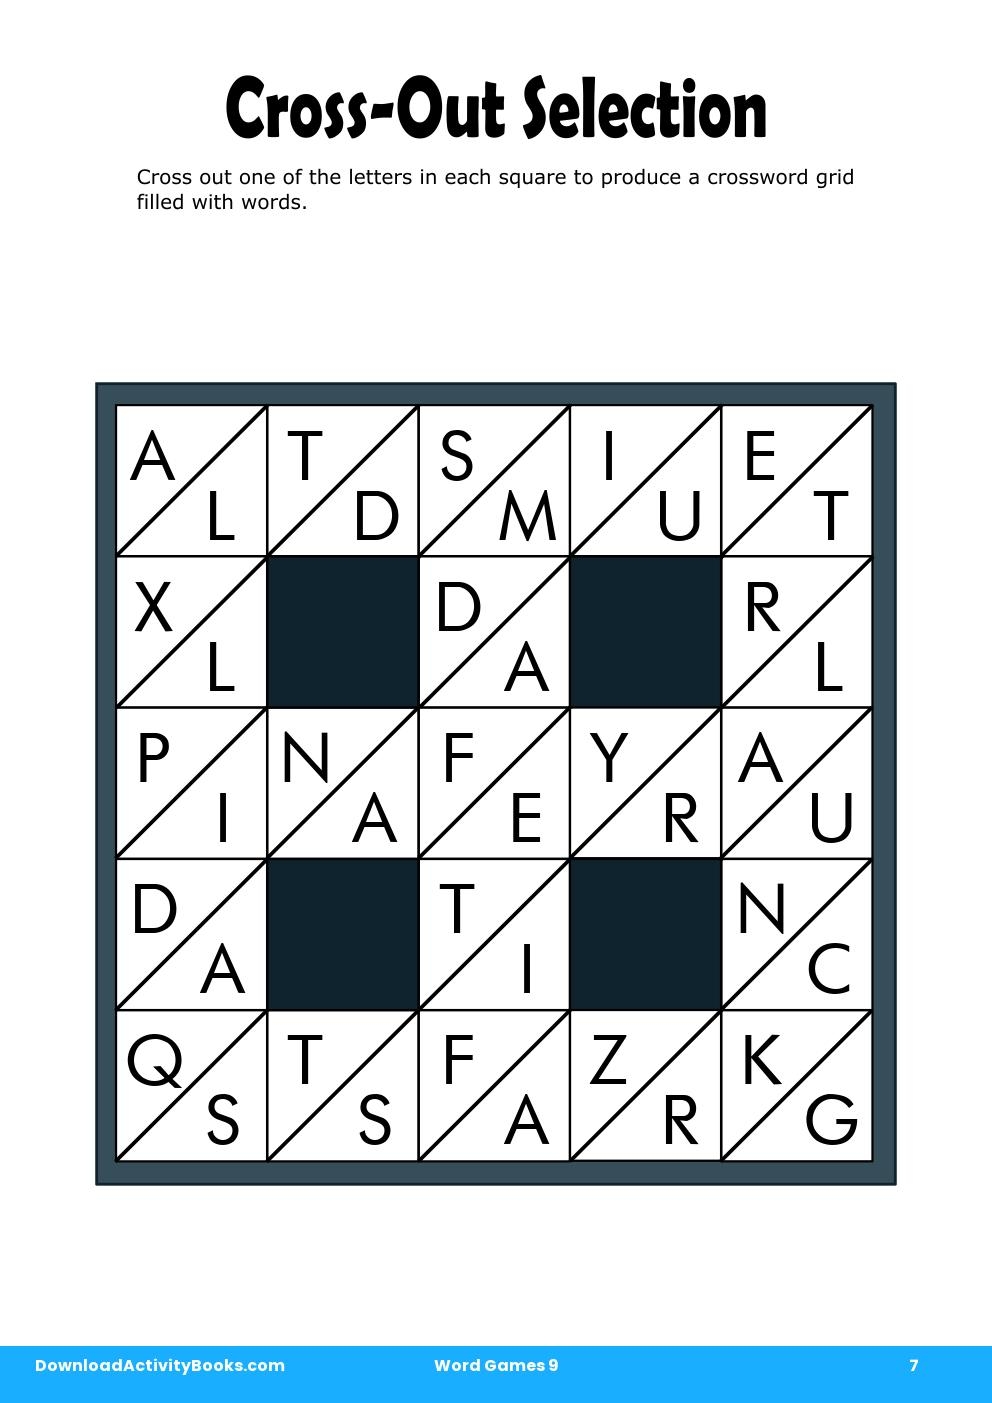 Cross-Out Selection in Word Games 9